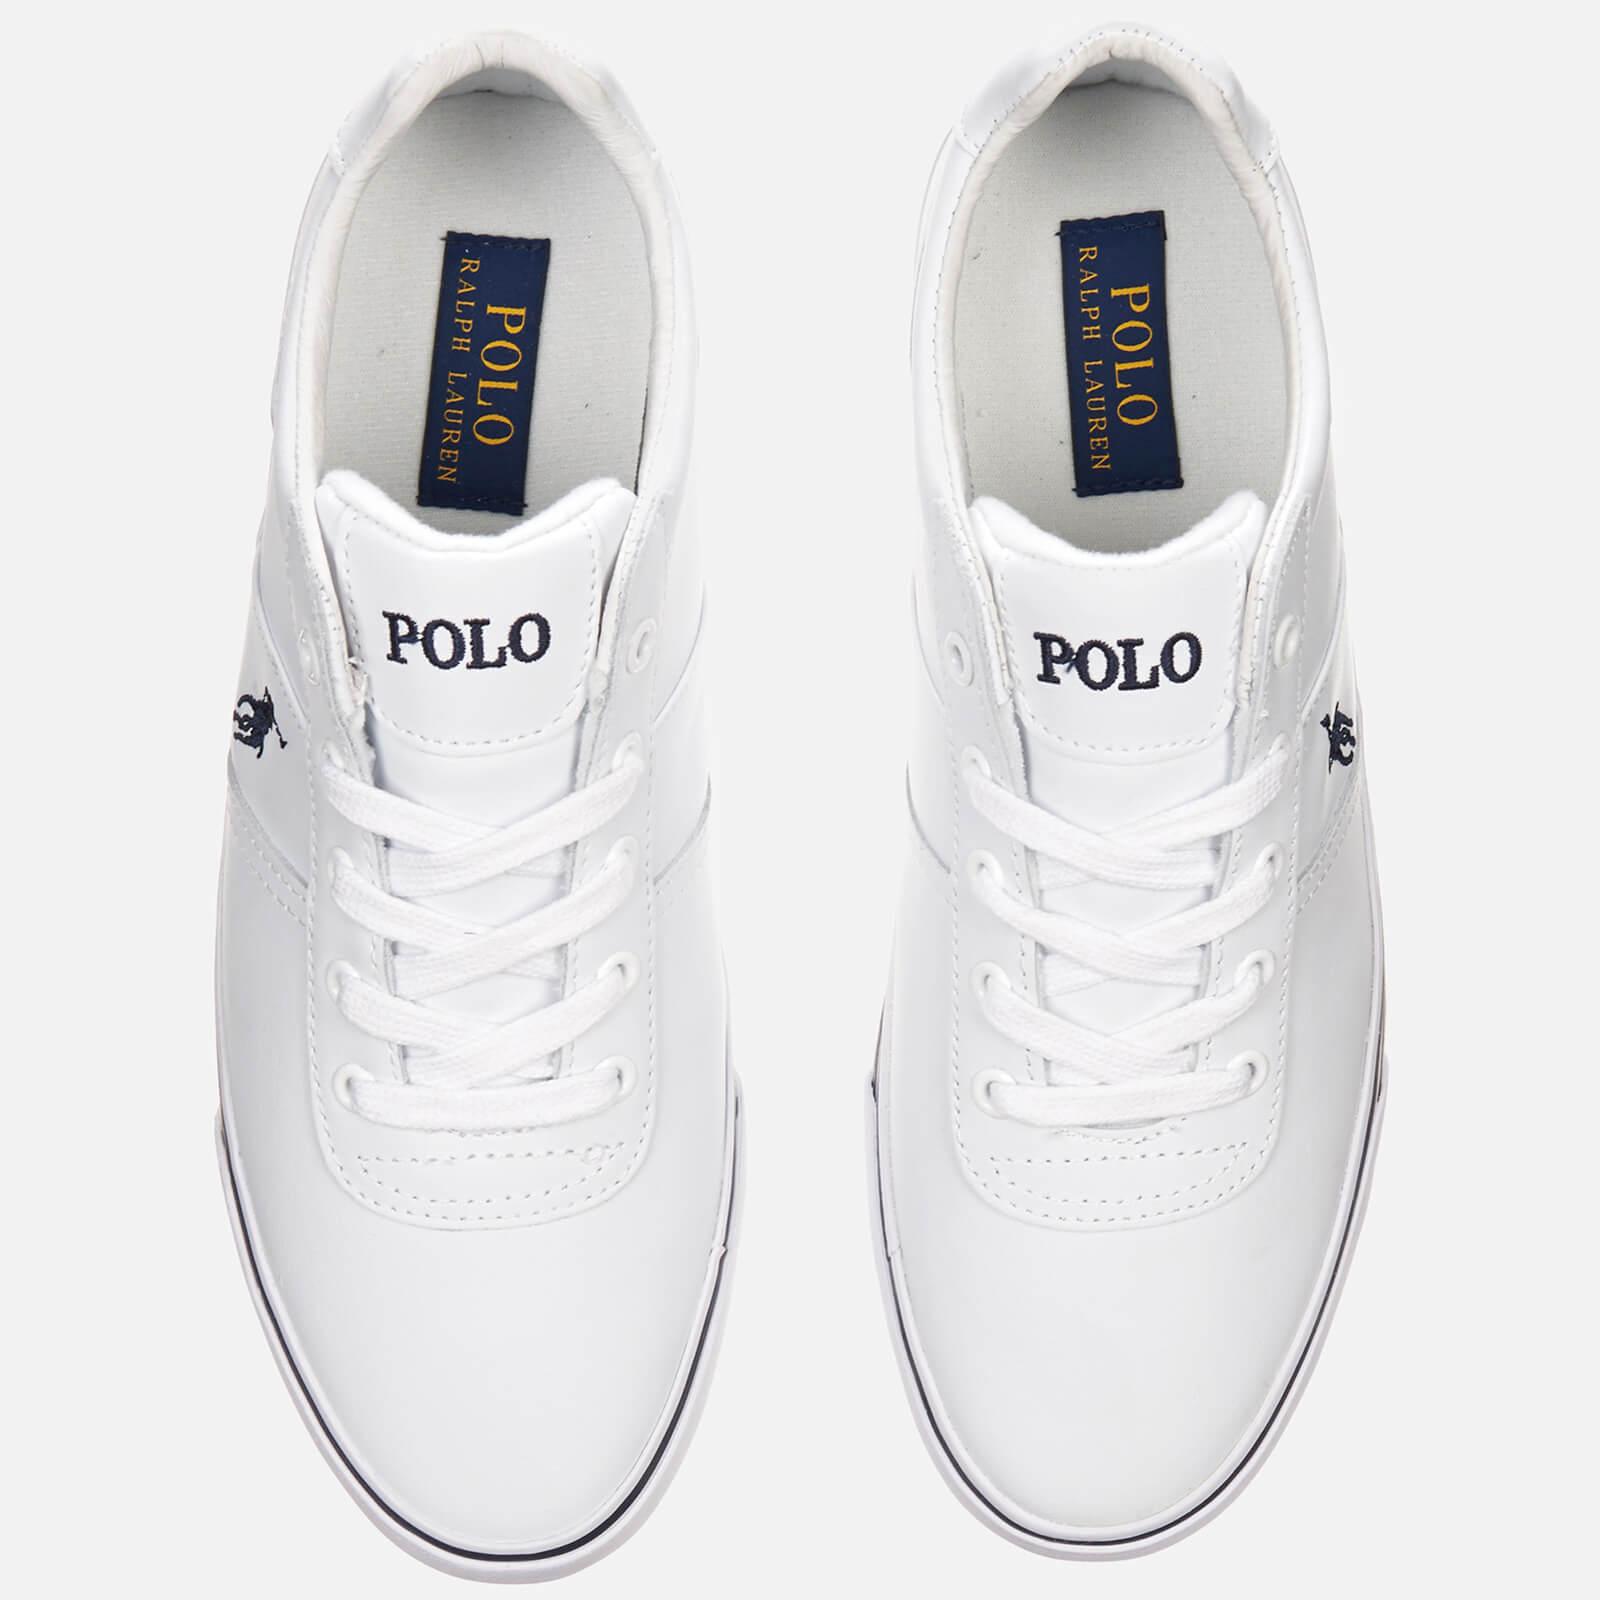 Polo Ralph Lauren Hanford Leather Trainers in White for Men - Lyst